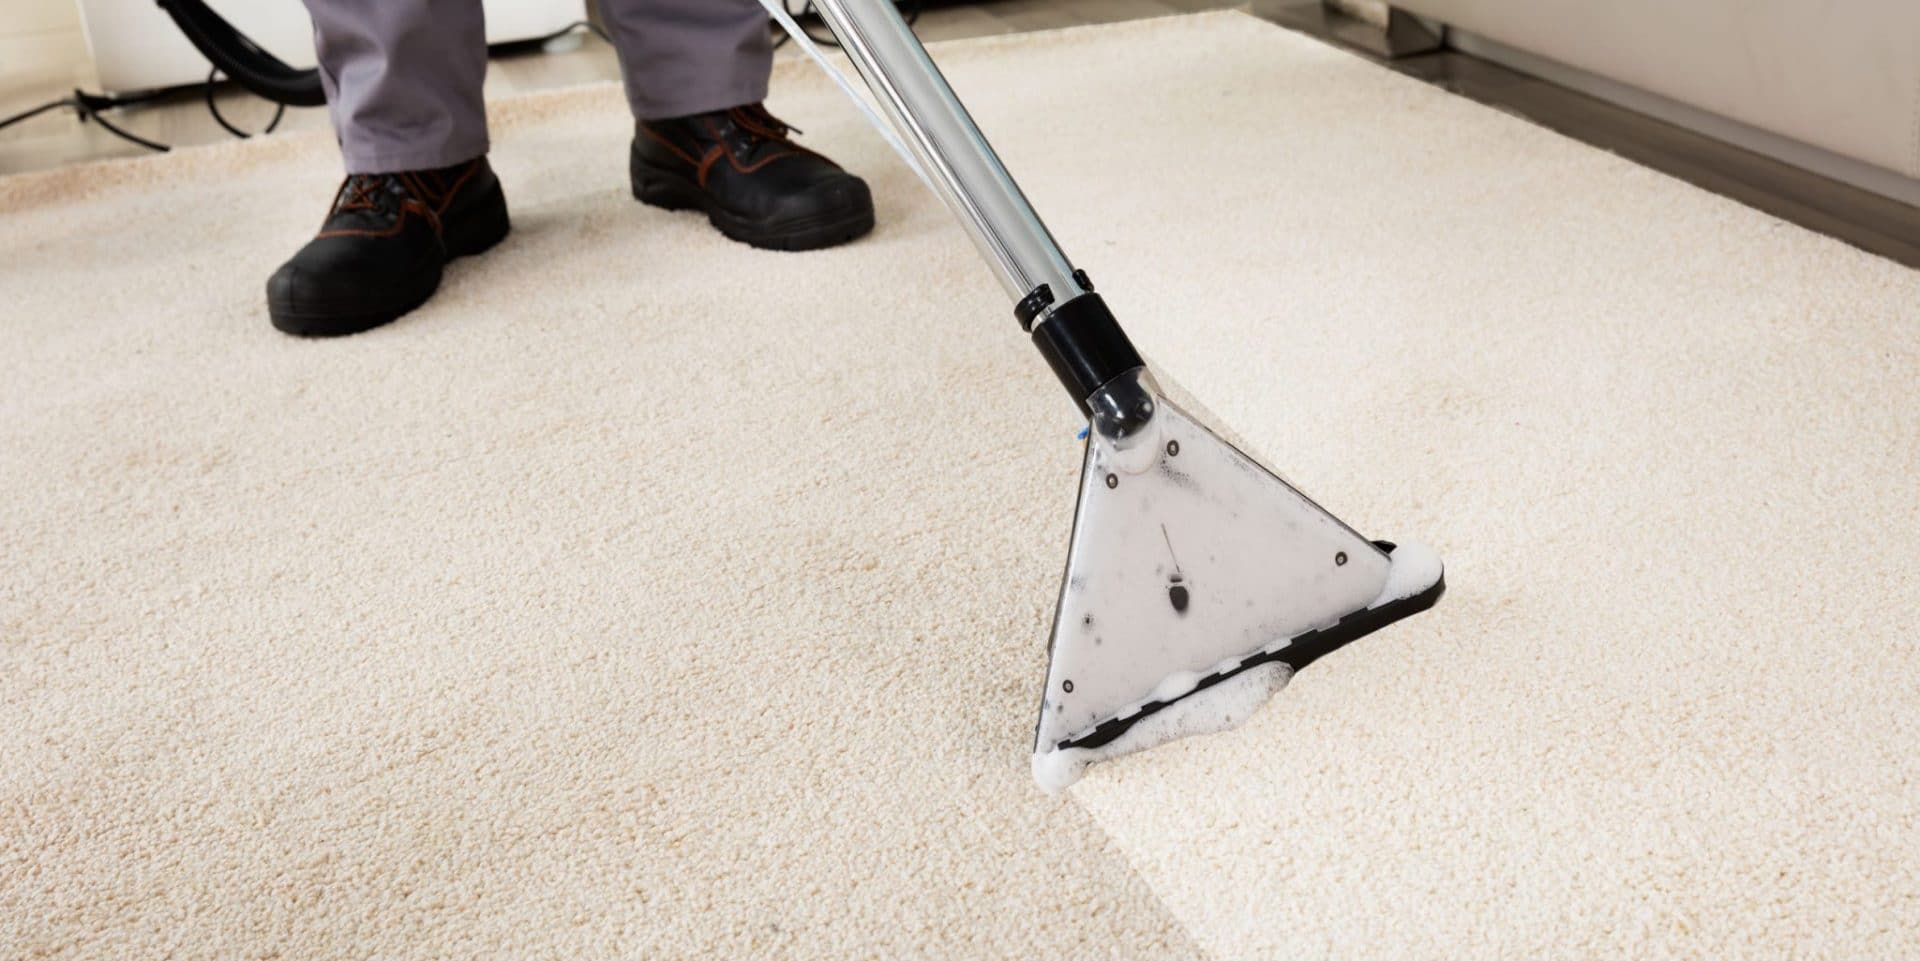 Sepcialist cleaning carpet with carpet cleaner